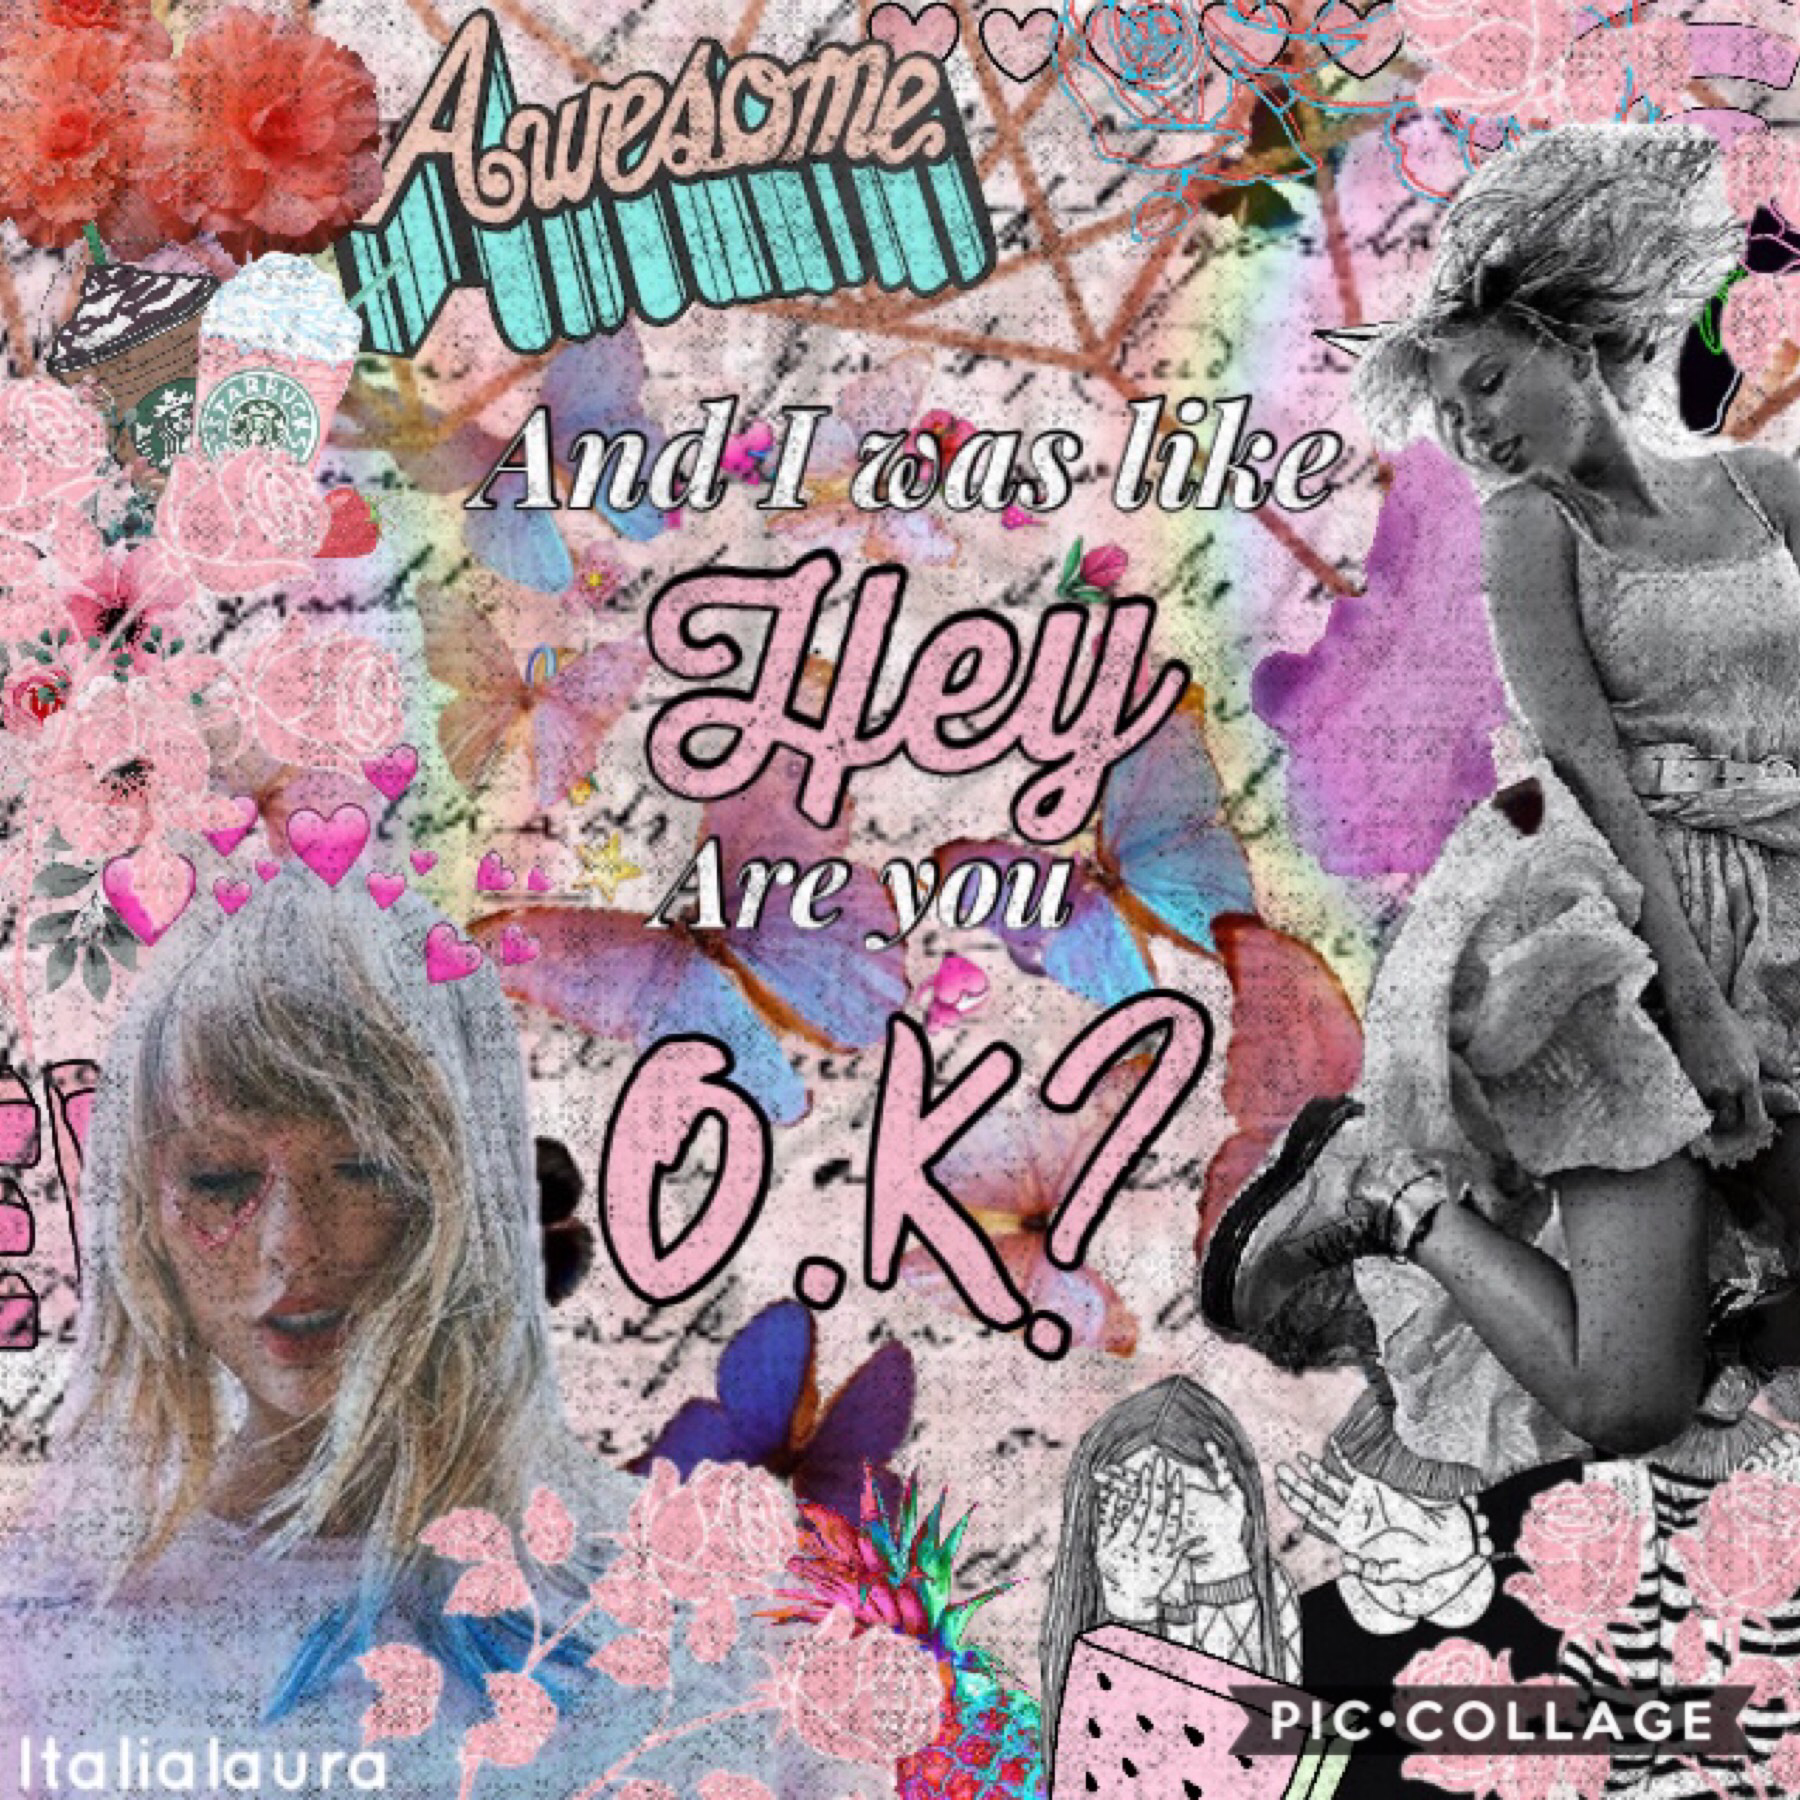 Taylor🌸 tap

I made this for girlandheroutfits ‘s contest go check it out!!